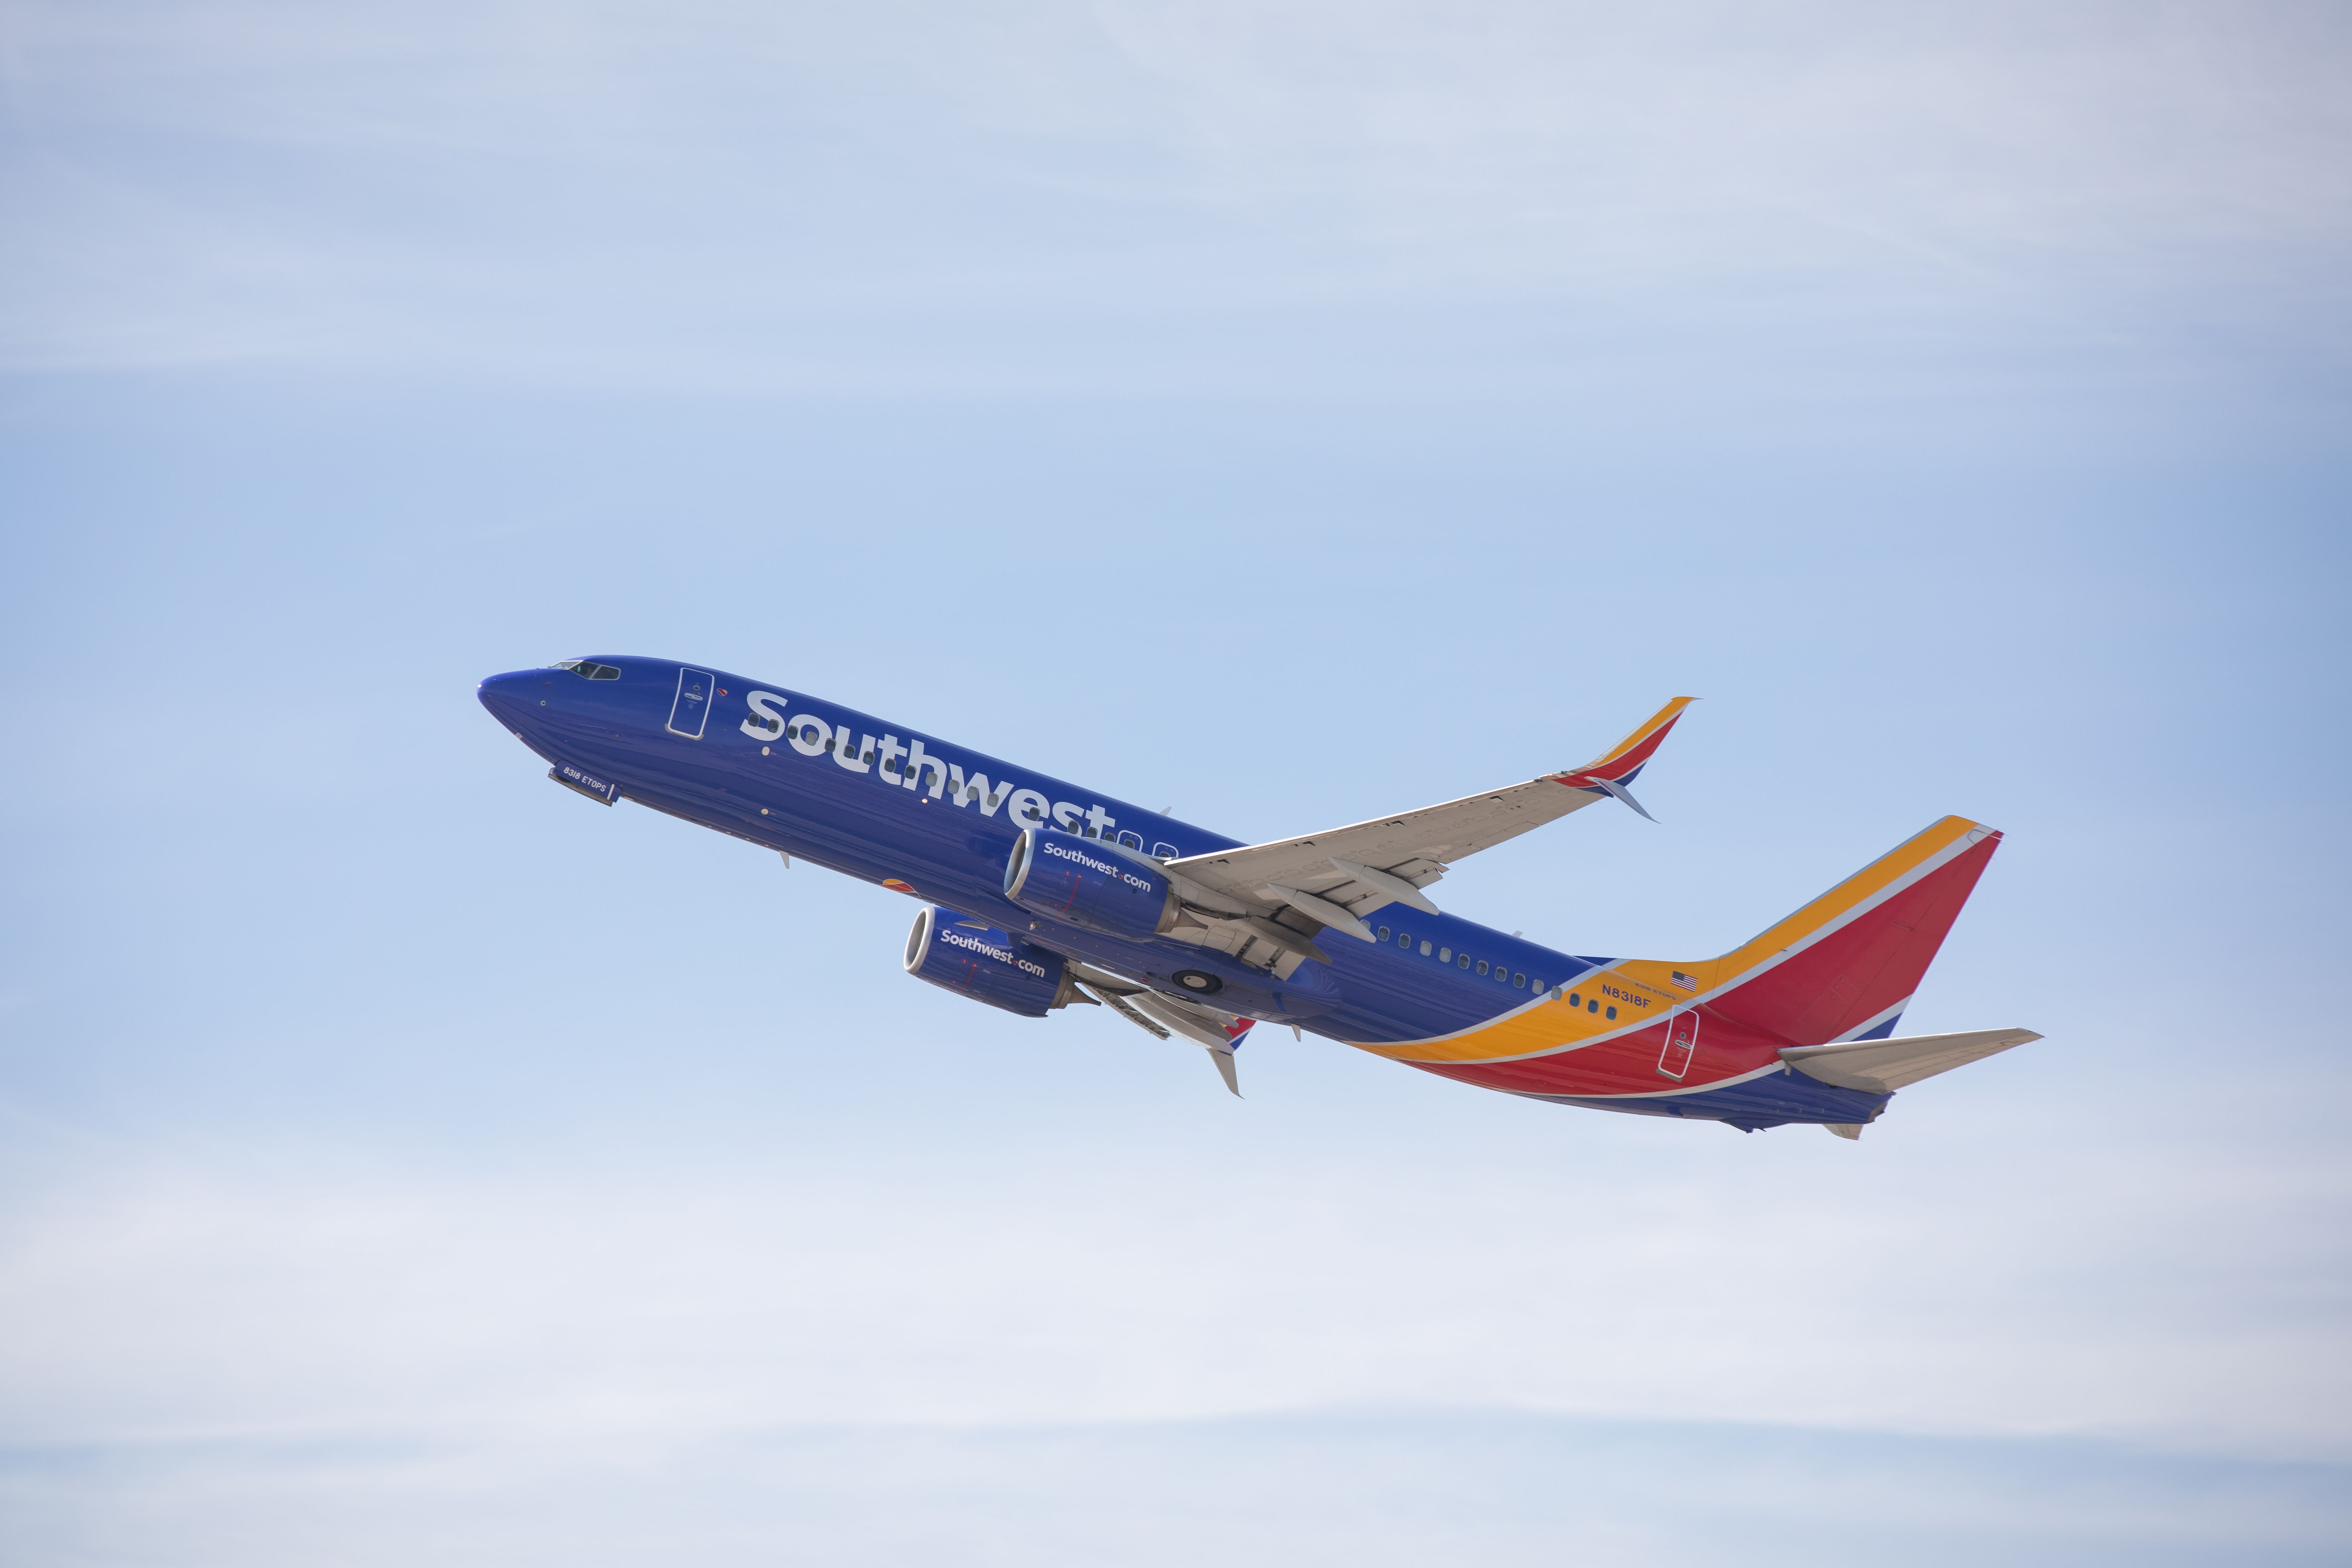 Photo: Southwest Airlines